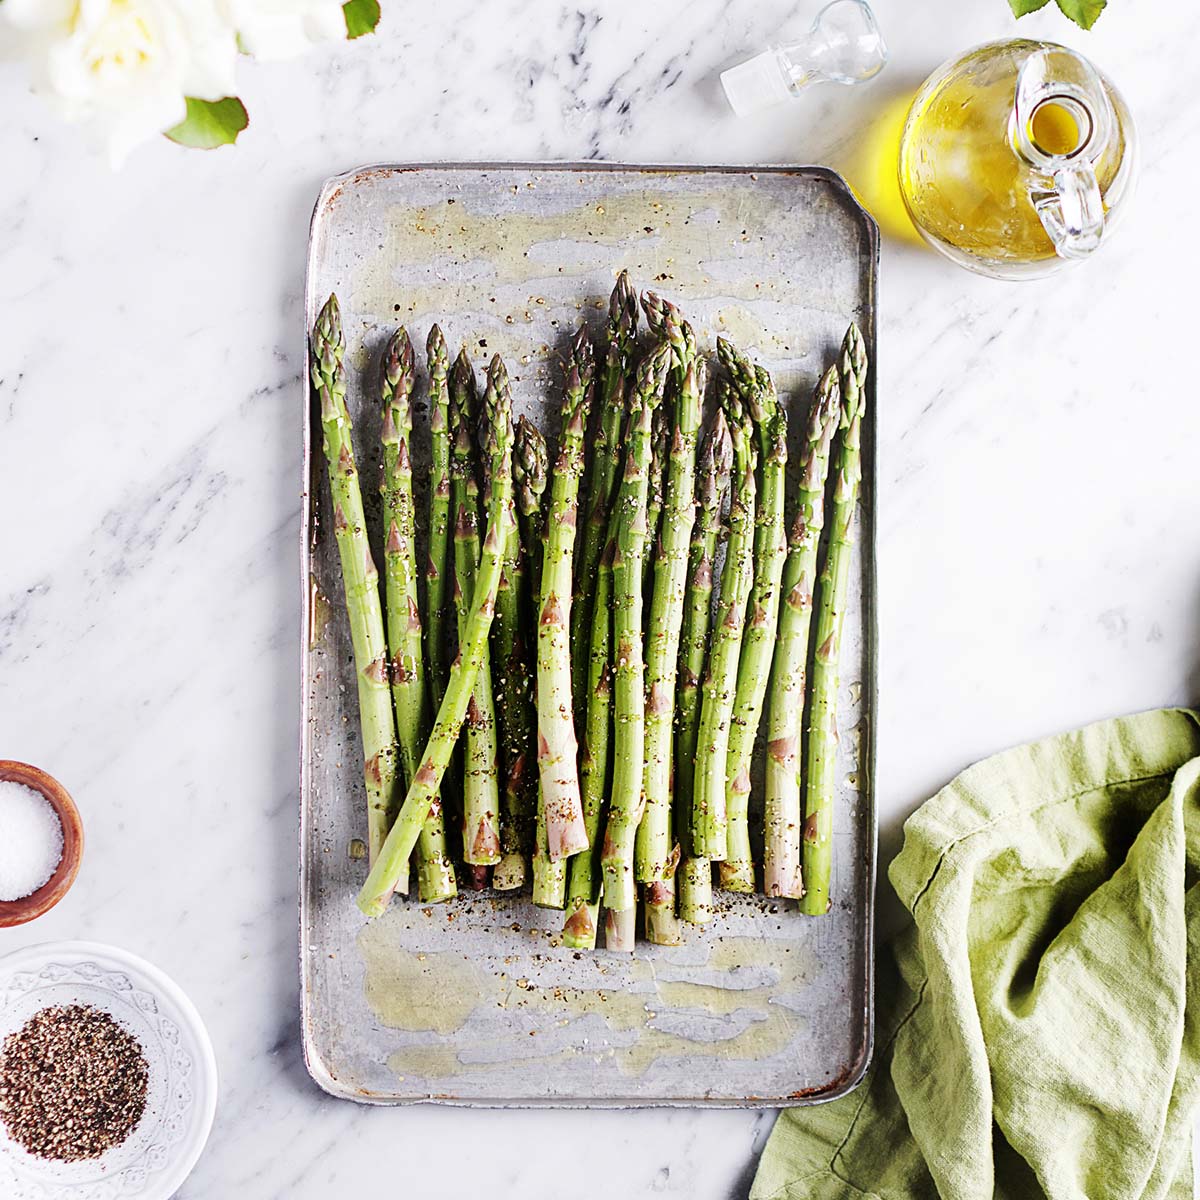 Asparagus placed on a baking tray seasoned with salt and pepper.